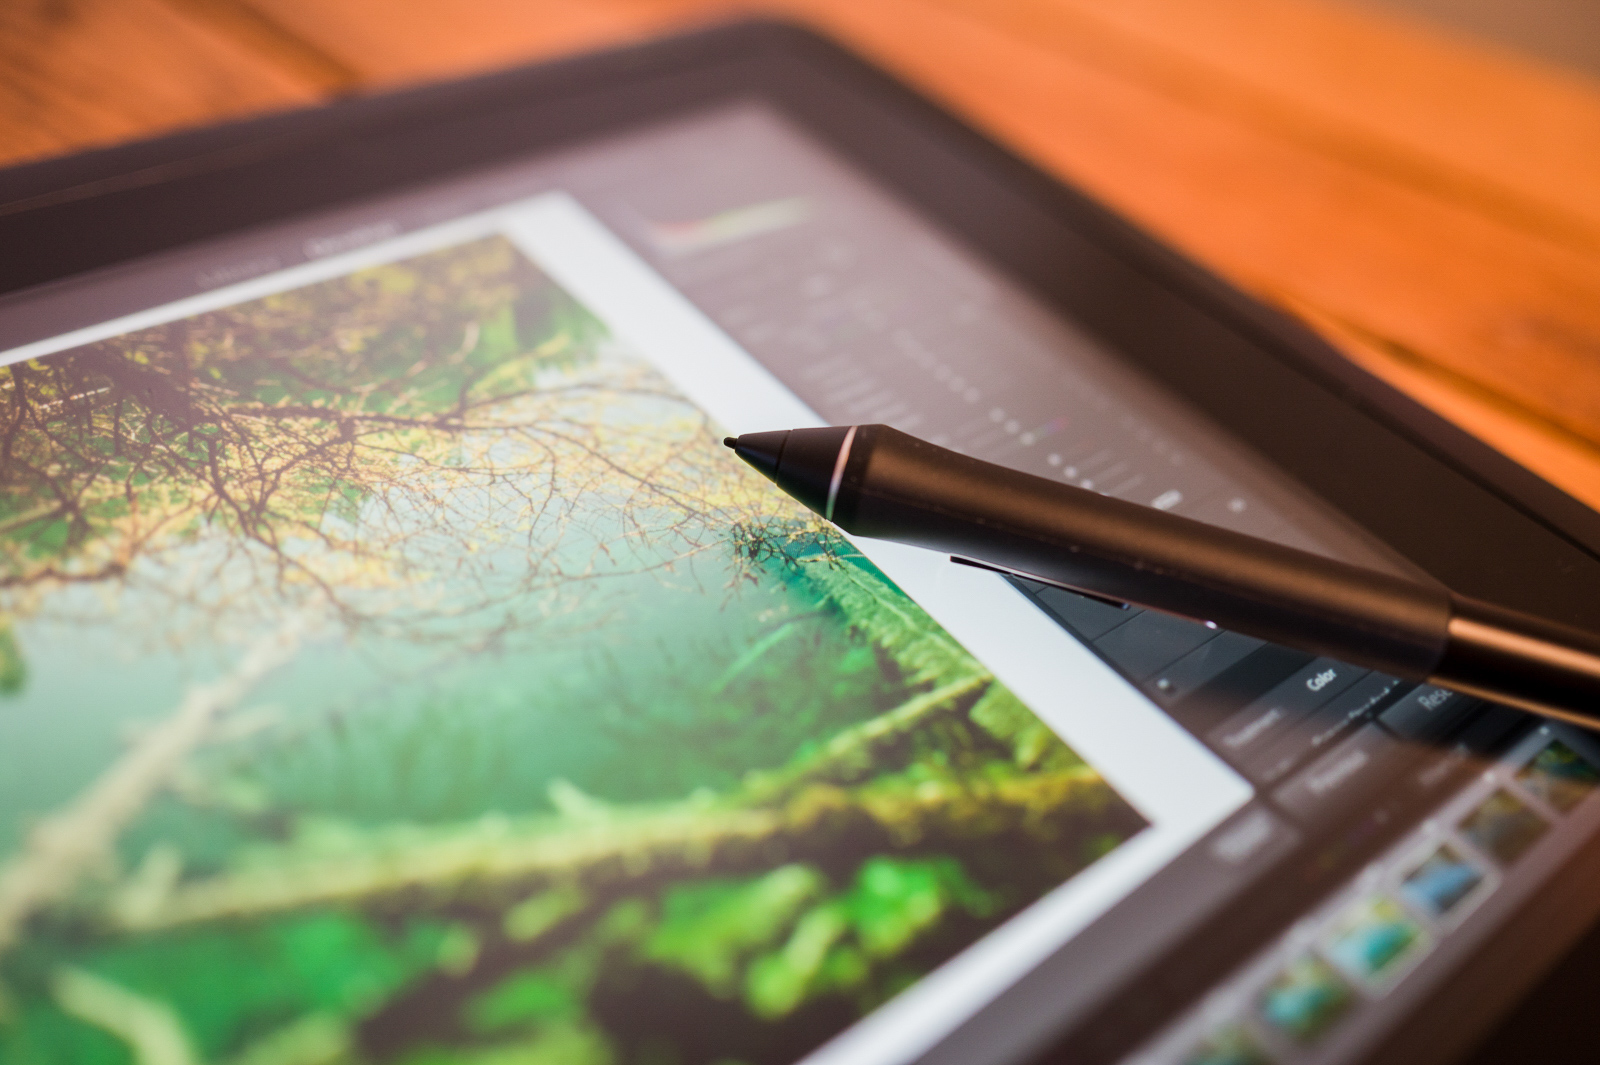 Wacom Cintiq 16 Review | A Pen Display for the Rest of Us